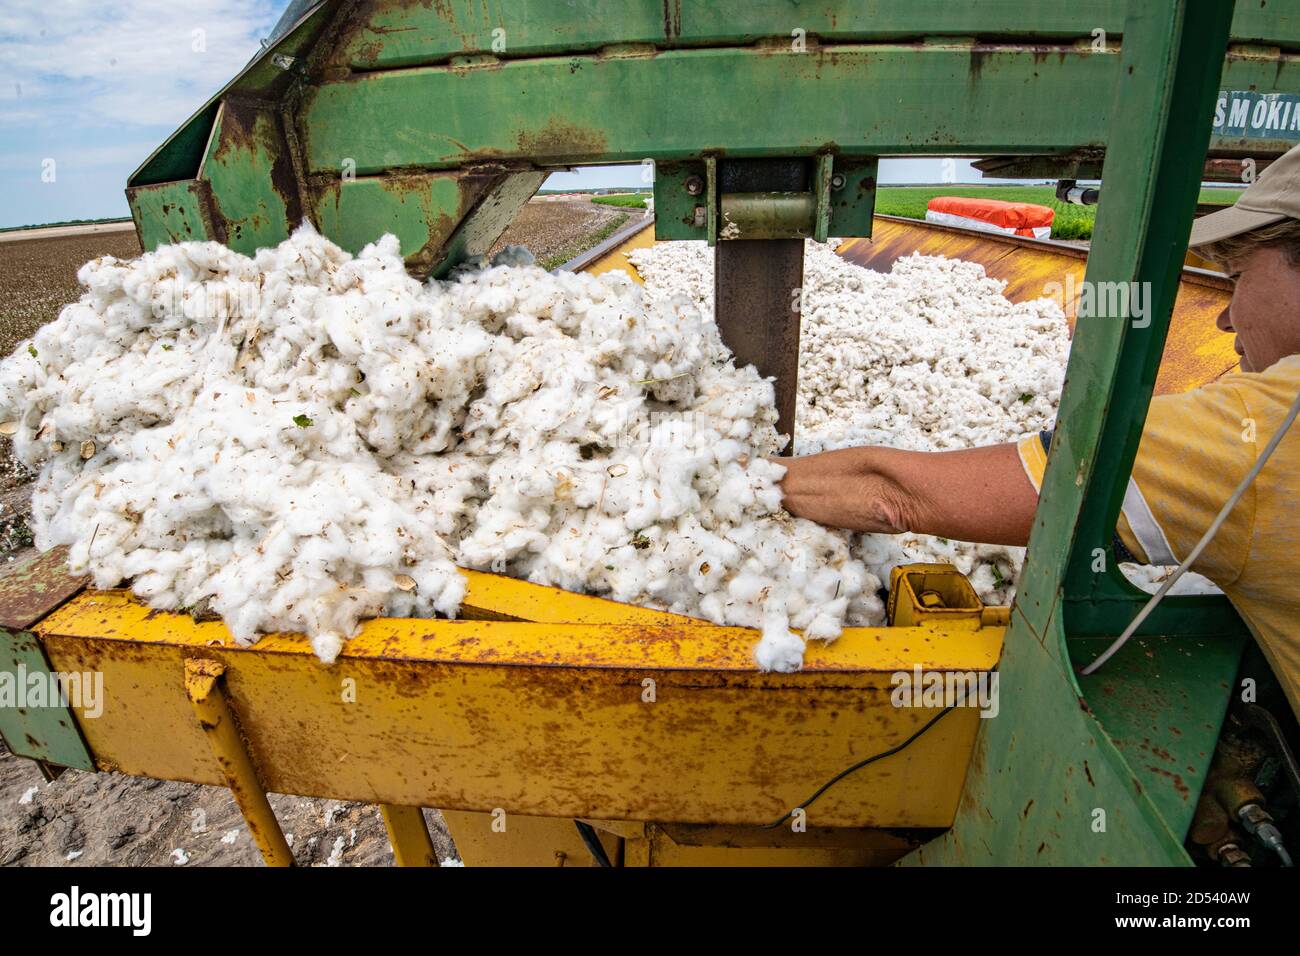 Terri Schirmer redistributes piles of cotton bolls that the hydraulic machinery can not reach, as she operates one of the stomper cotton module builders at the Ernie Schirmer Farms during the cotton harvest August 22, 2020 in Batesville, Texas. Stock Photo